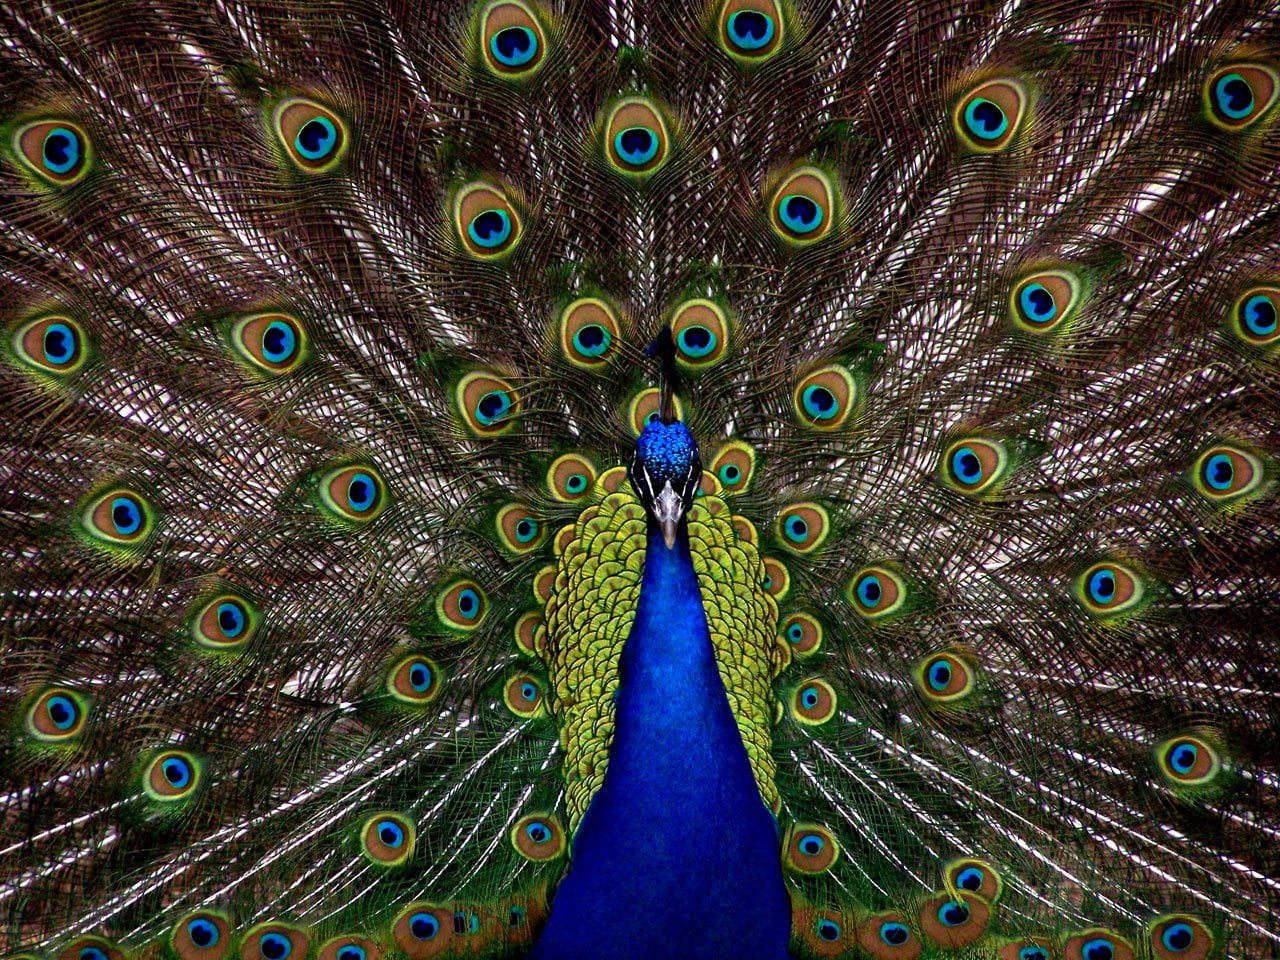 shallow focus photography of blue, brown and green peacock